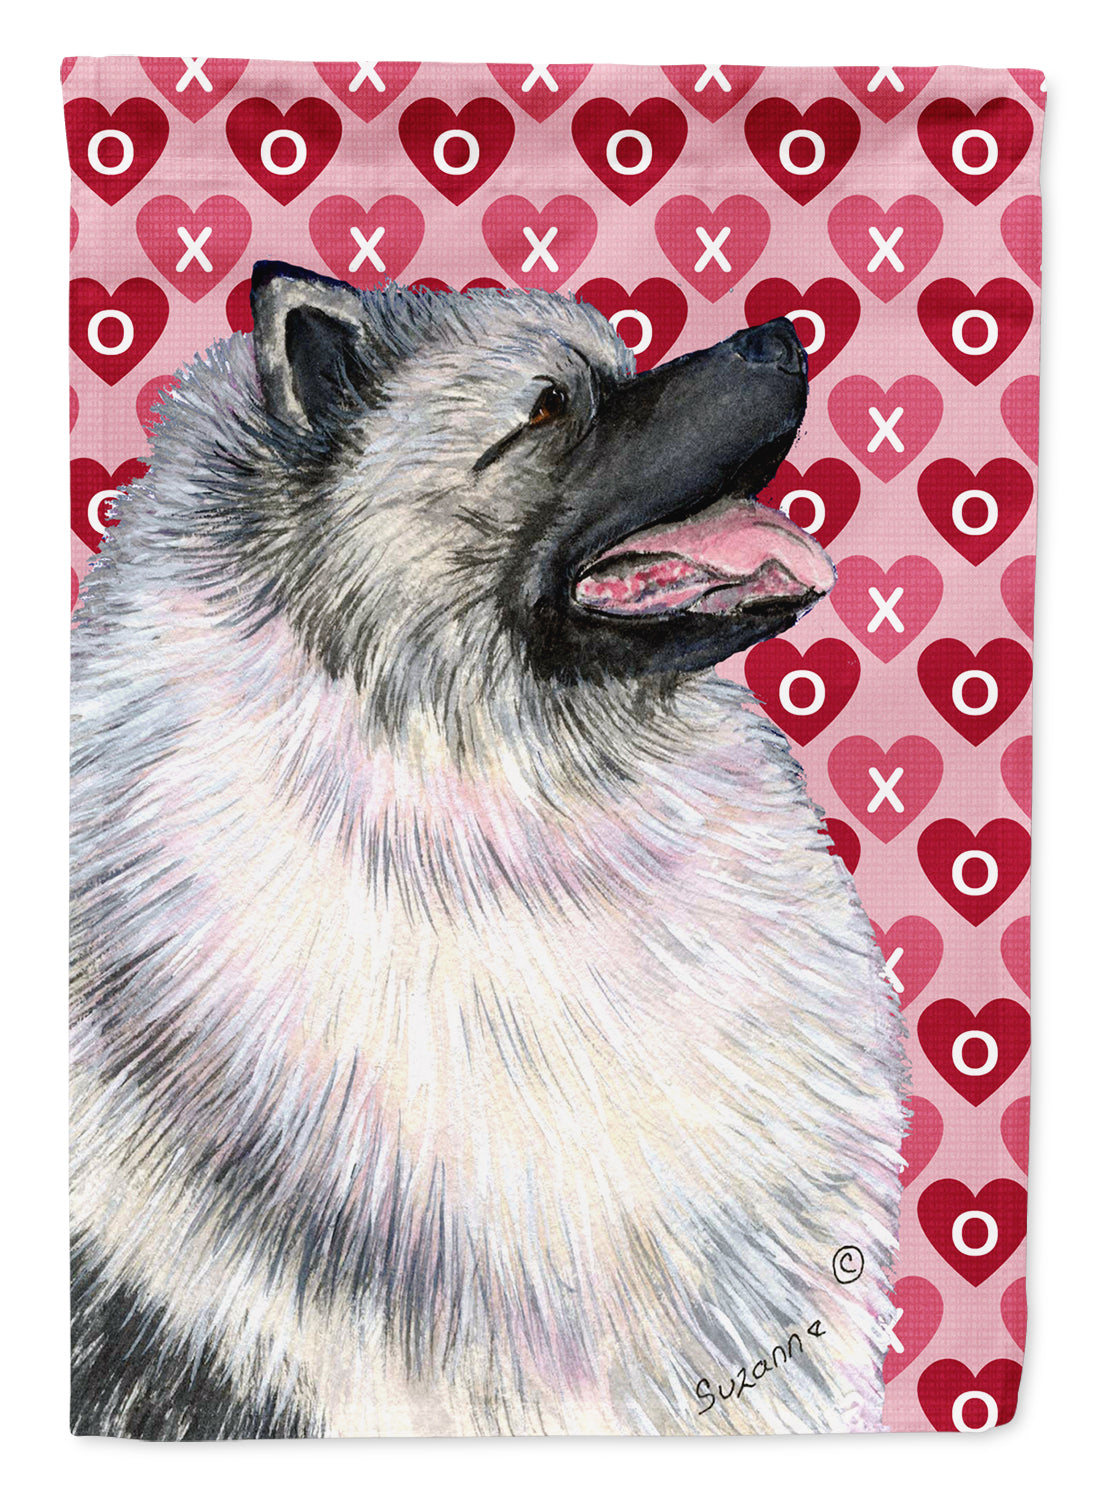 Keeshond Hearts Love and Valentine's Day Portrait Flag Garden Size.